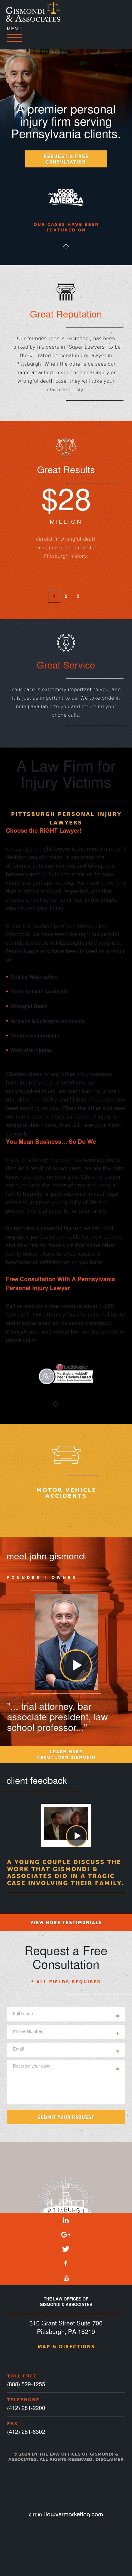 The Law Offices of Gismondi & Associates - Pittsburgh PA Lawyers